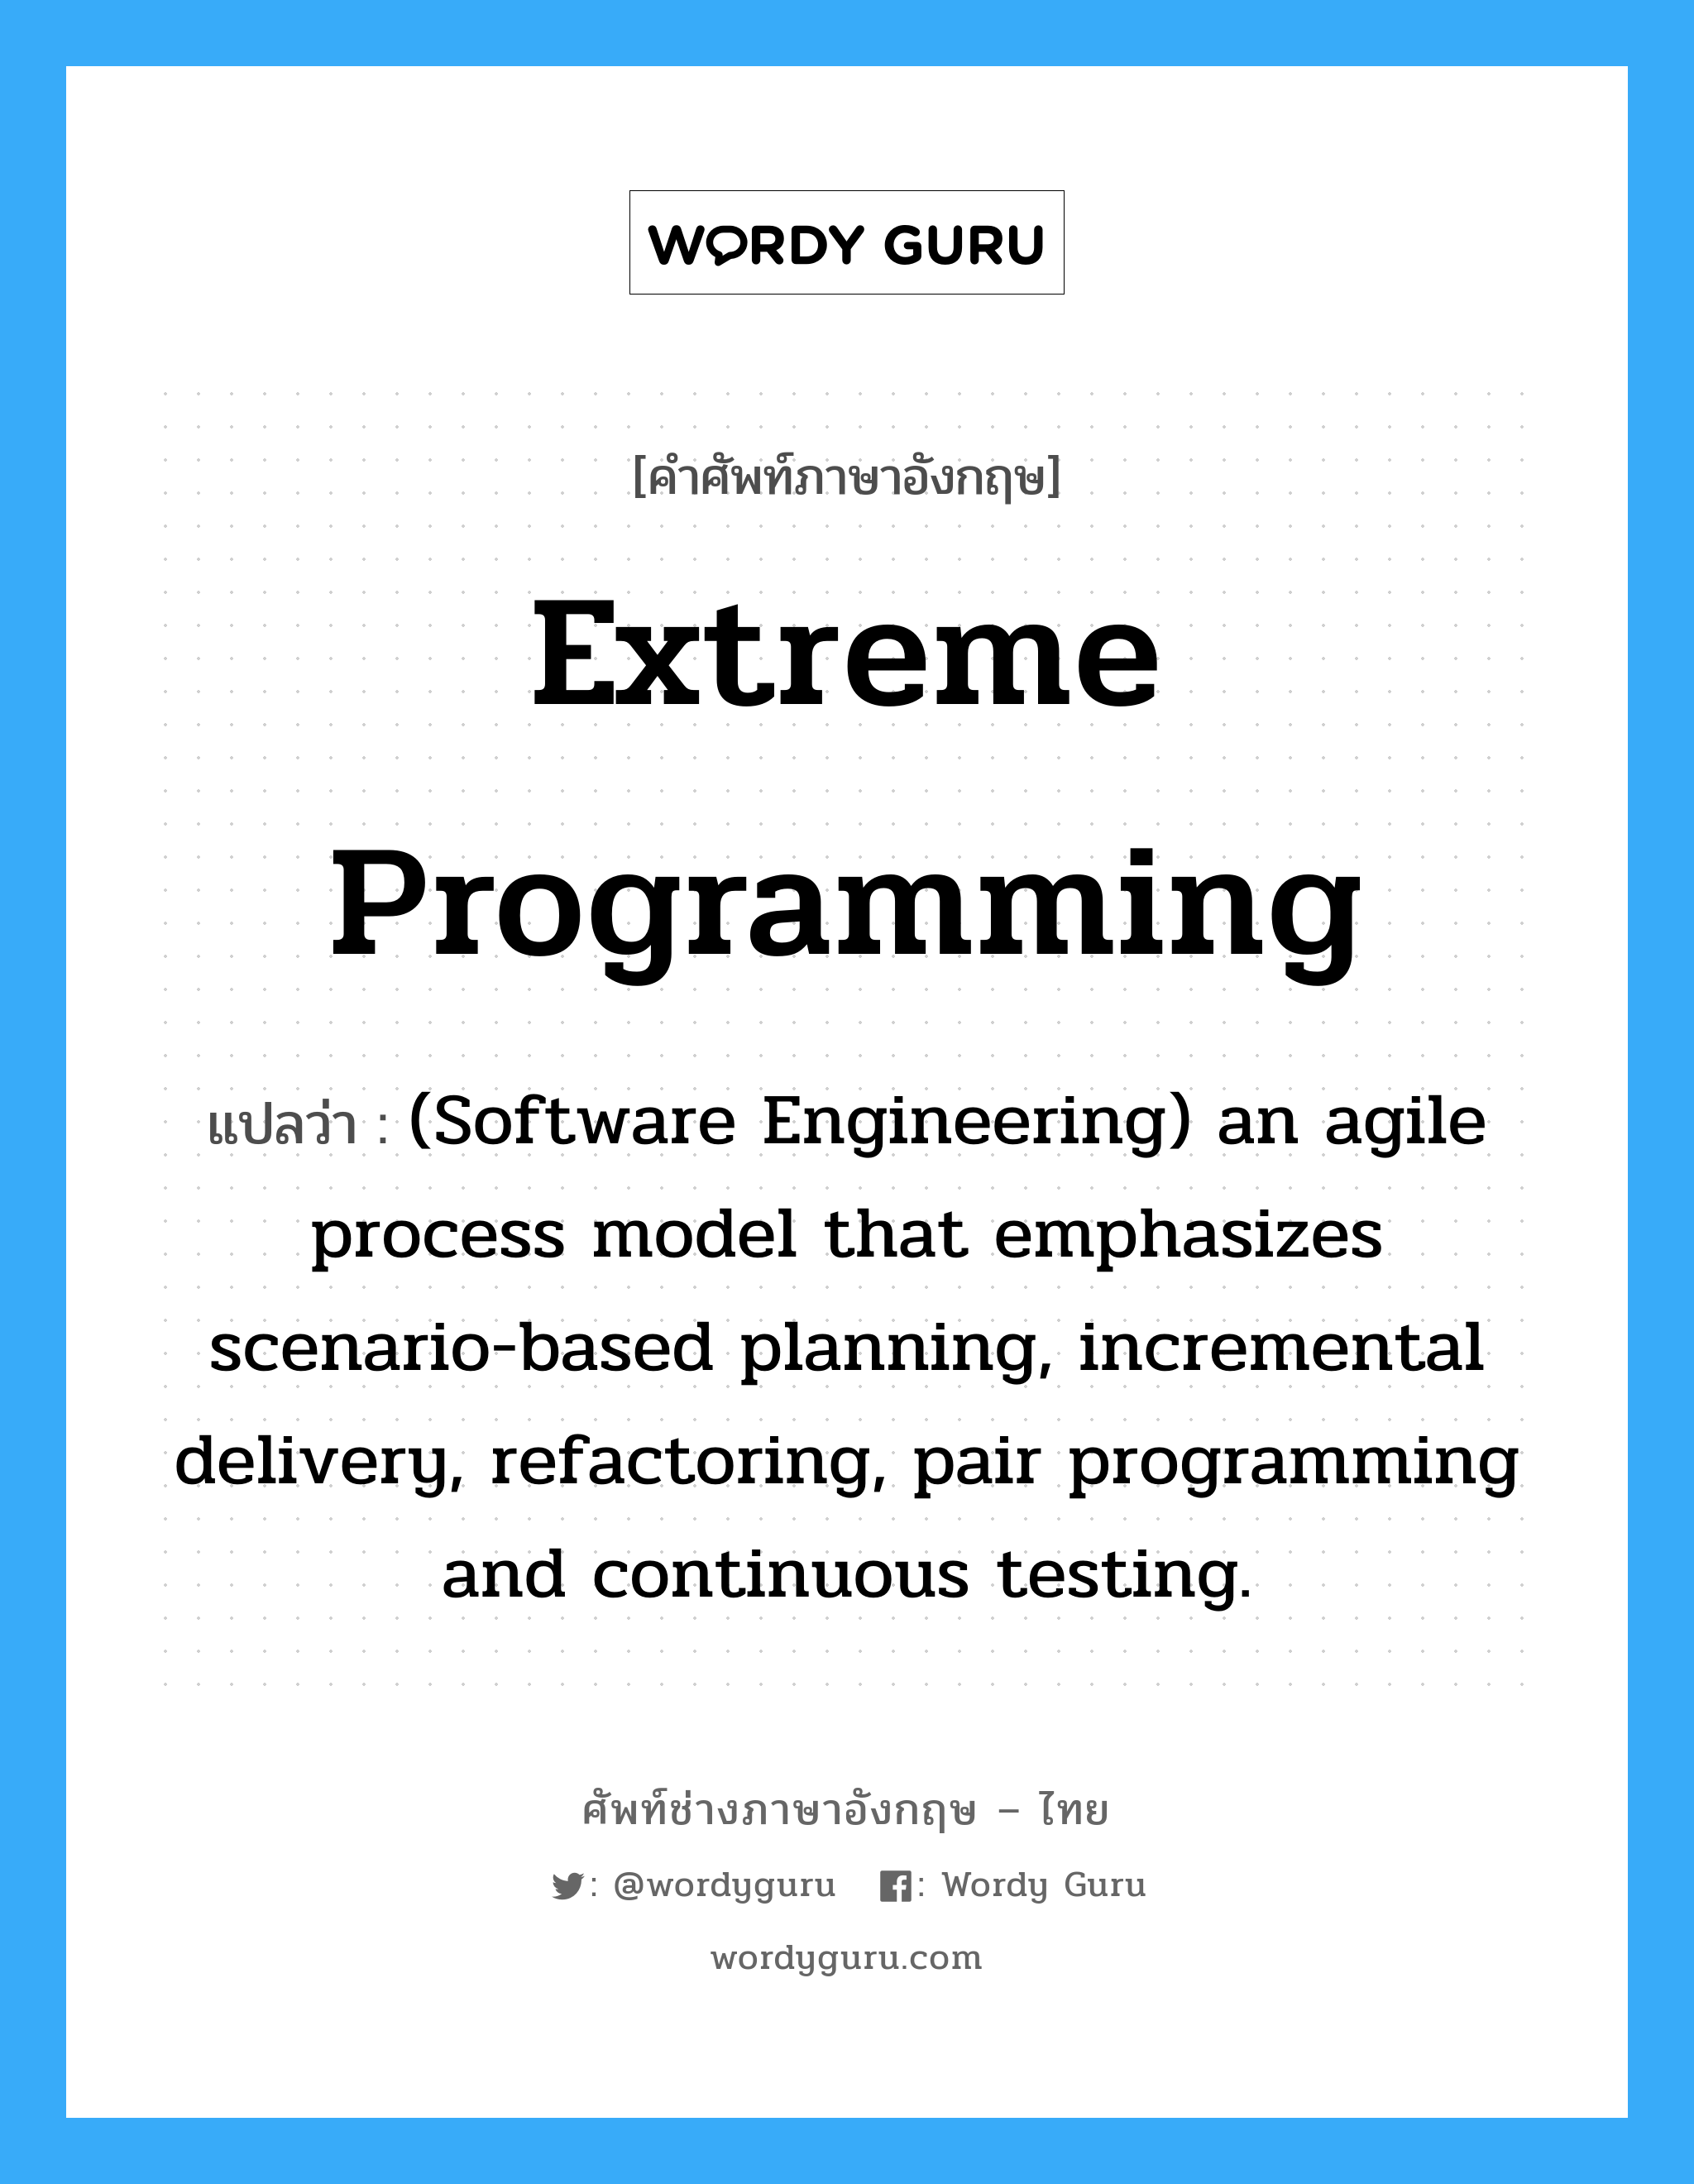 Extreme programming แปลว่า?, คำศัพท์ช่างภาษาอังกฤษ - ไทย Extreme programming คำศัพท์ภาษาอังกฤษ Extreme programming แปลว่า (Software Engineering) an agile process model that emphasizes scenario-based planning, incremental delivery, refactoring, pair programming and continuous testing.